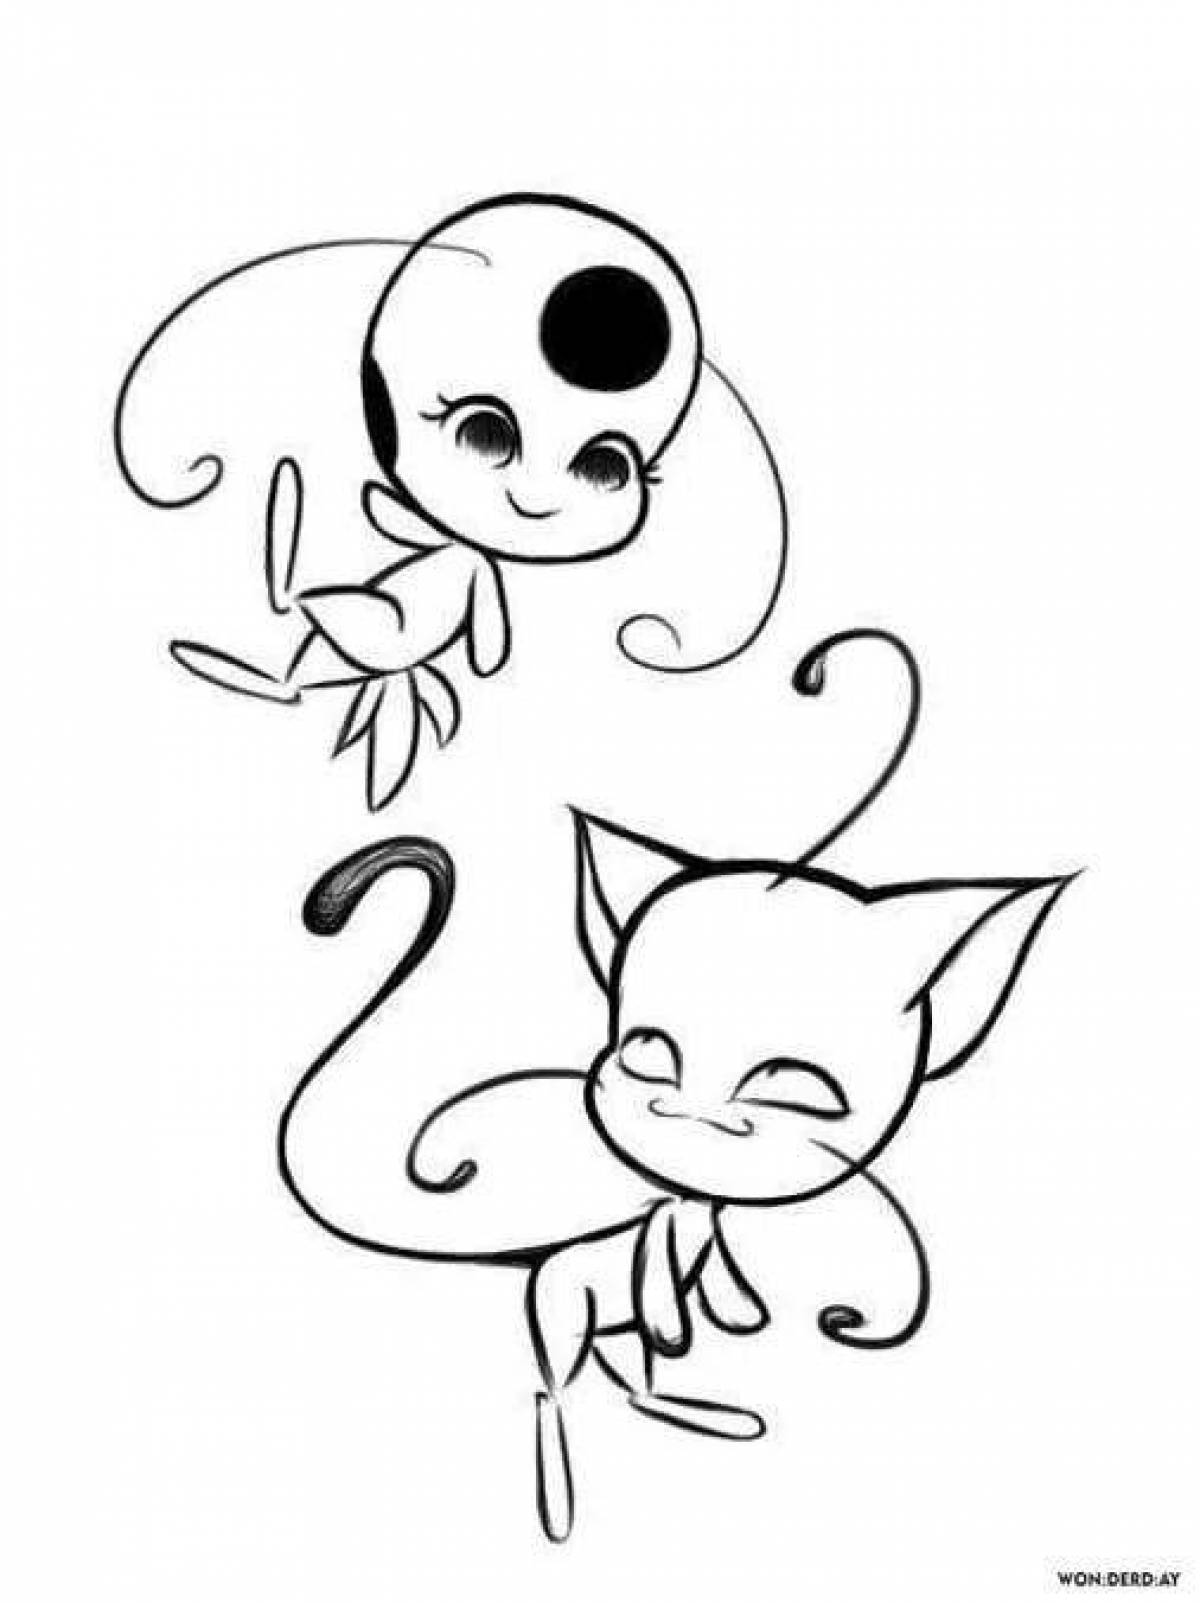 Lady bug and super cat tikki and plugg #7